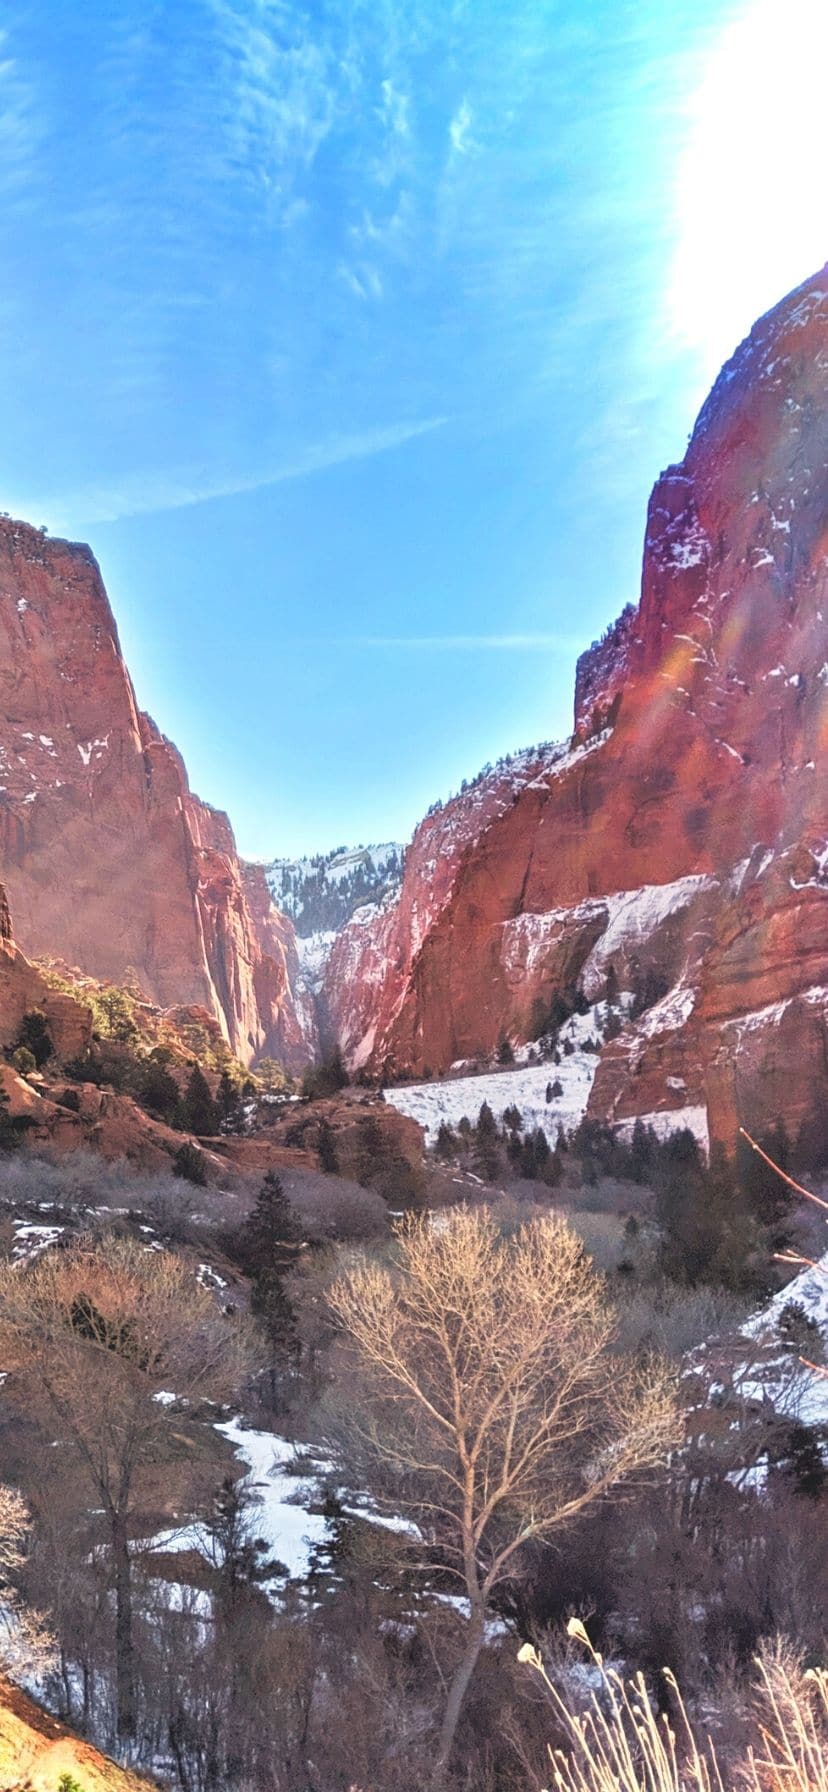 Best hikes in Zion National Park include difficult and kid-friendly hiking. The Narrows, Zion Overlook, Emerald Pools and hiking in Kolob Canyons are just a few. These are the top hikes in Zion NP, UT